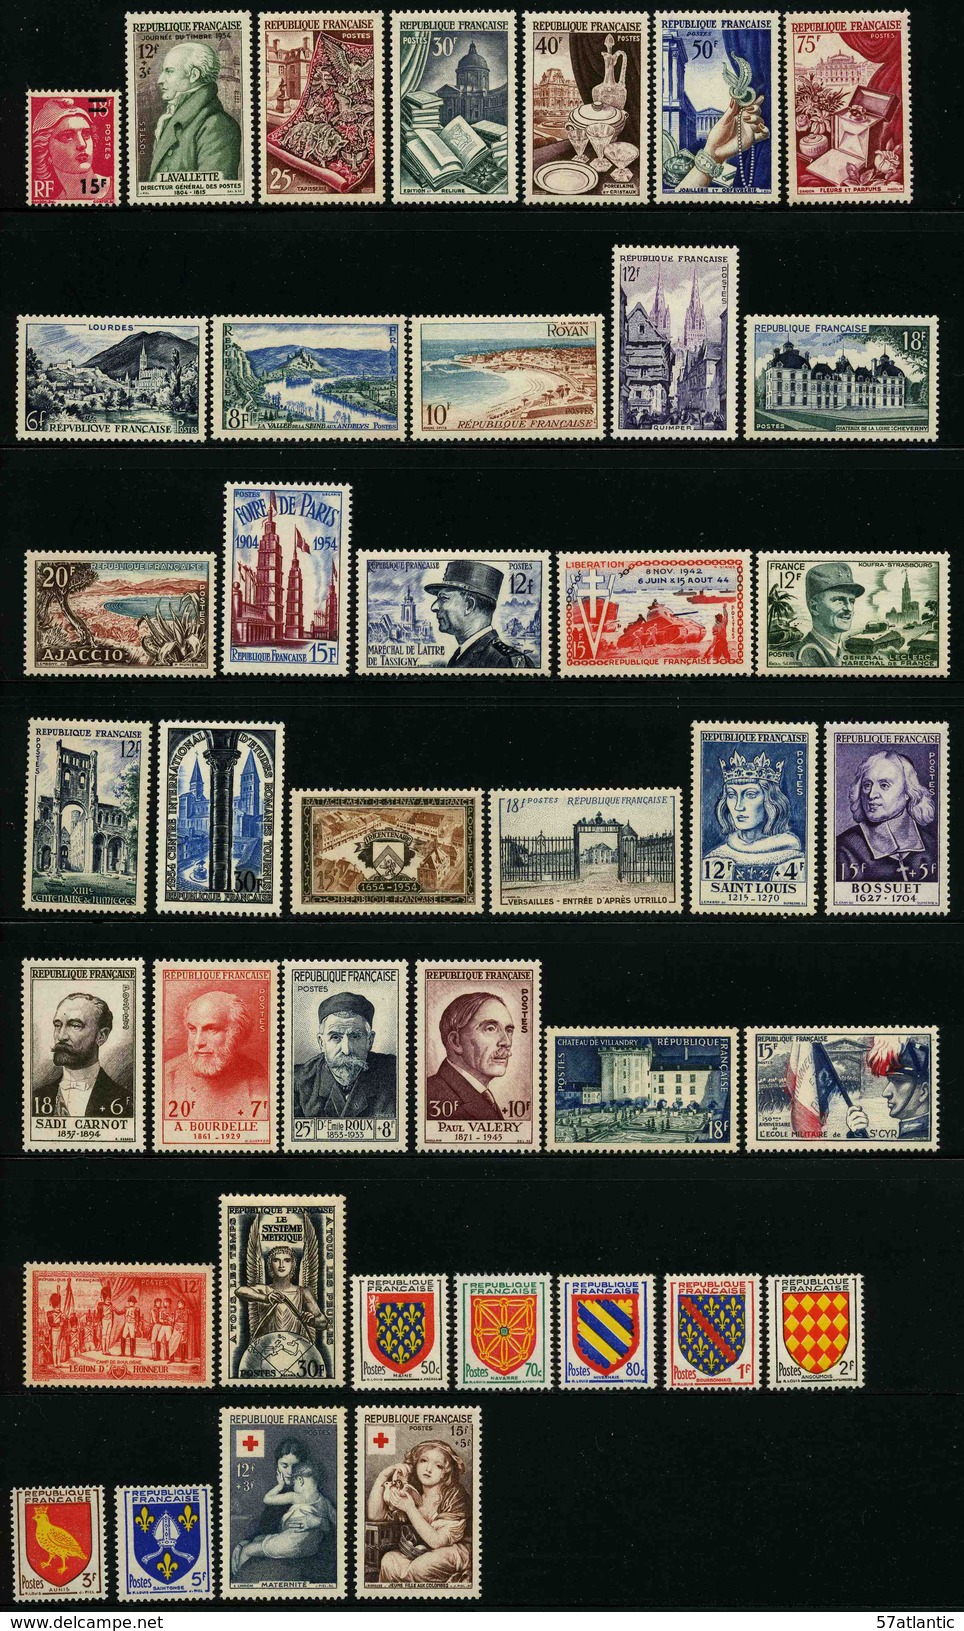 FRANCE - ANNEE COMPLETE 1954 - YT 968 à 1007 ** - 40 TIMBRES NEUFS ** - 1950-1959